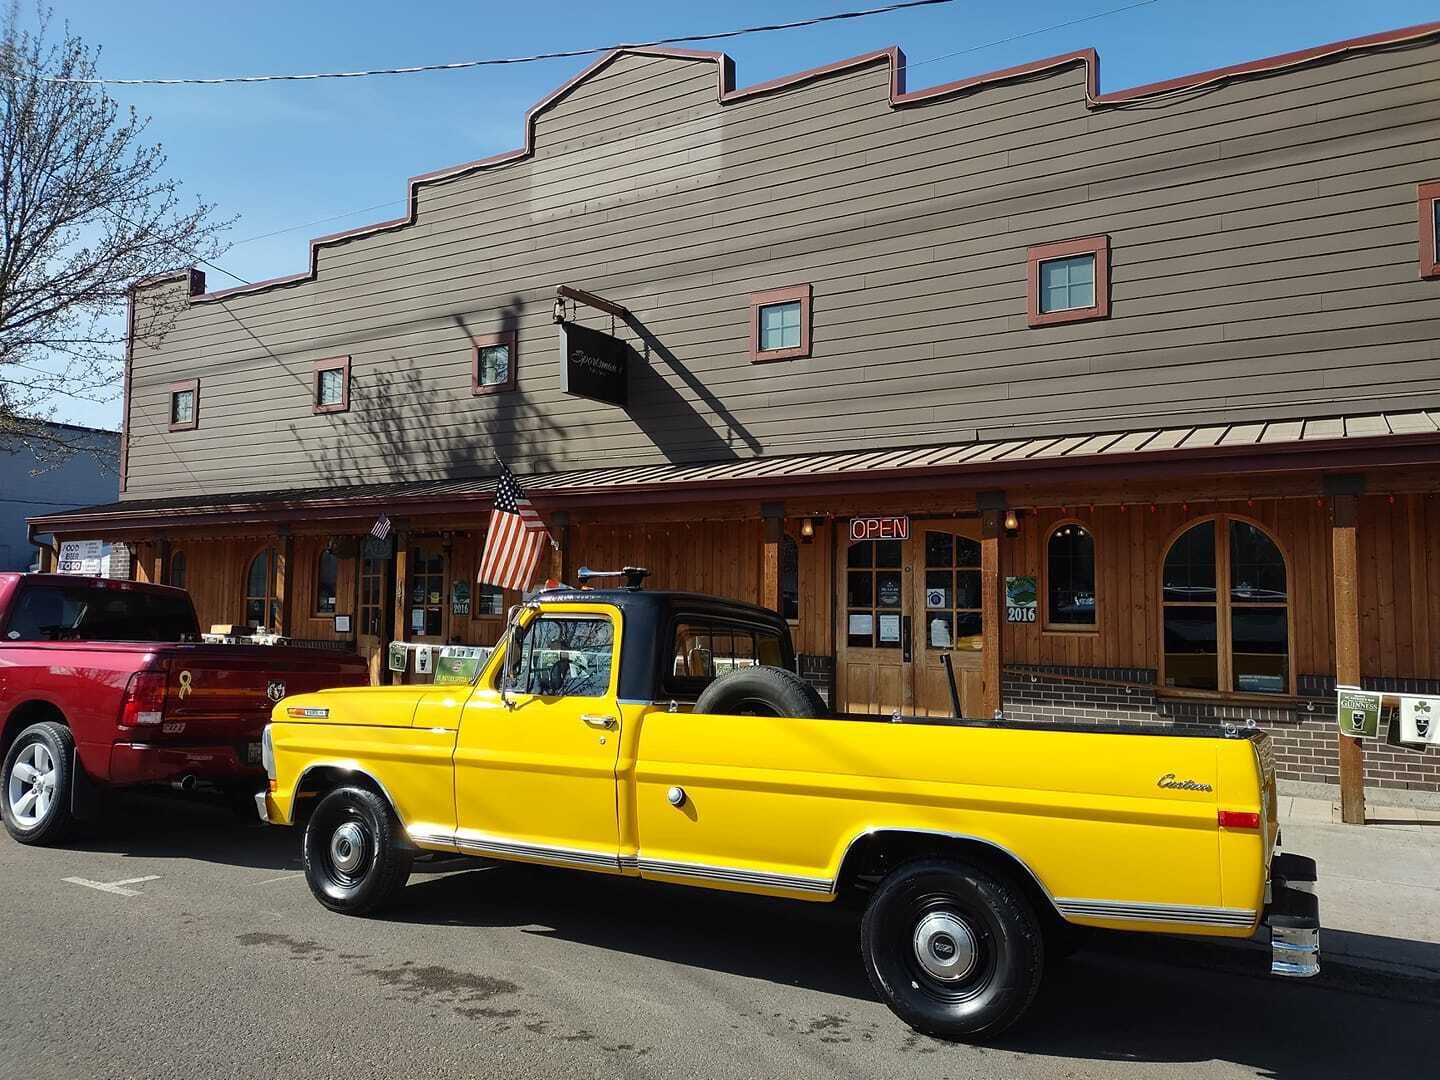 Rob Aichele also took the truck to Sportsmans in downtown Ridgefield for Taco Tuesday.